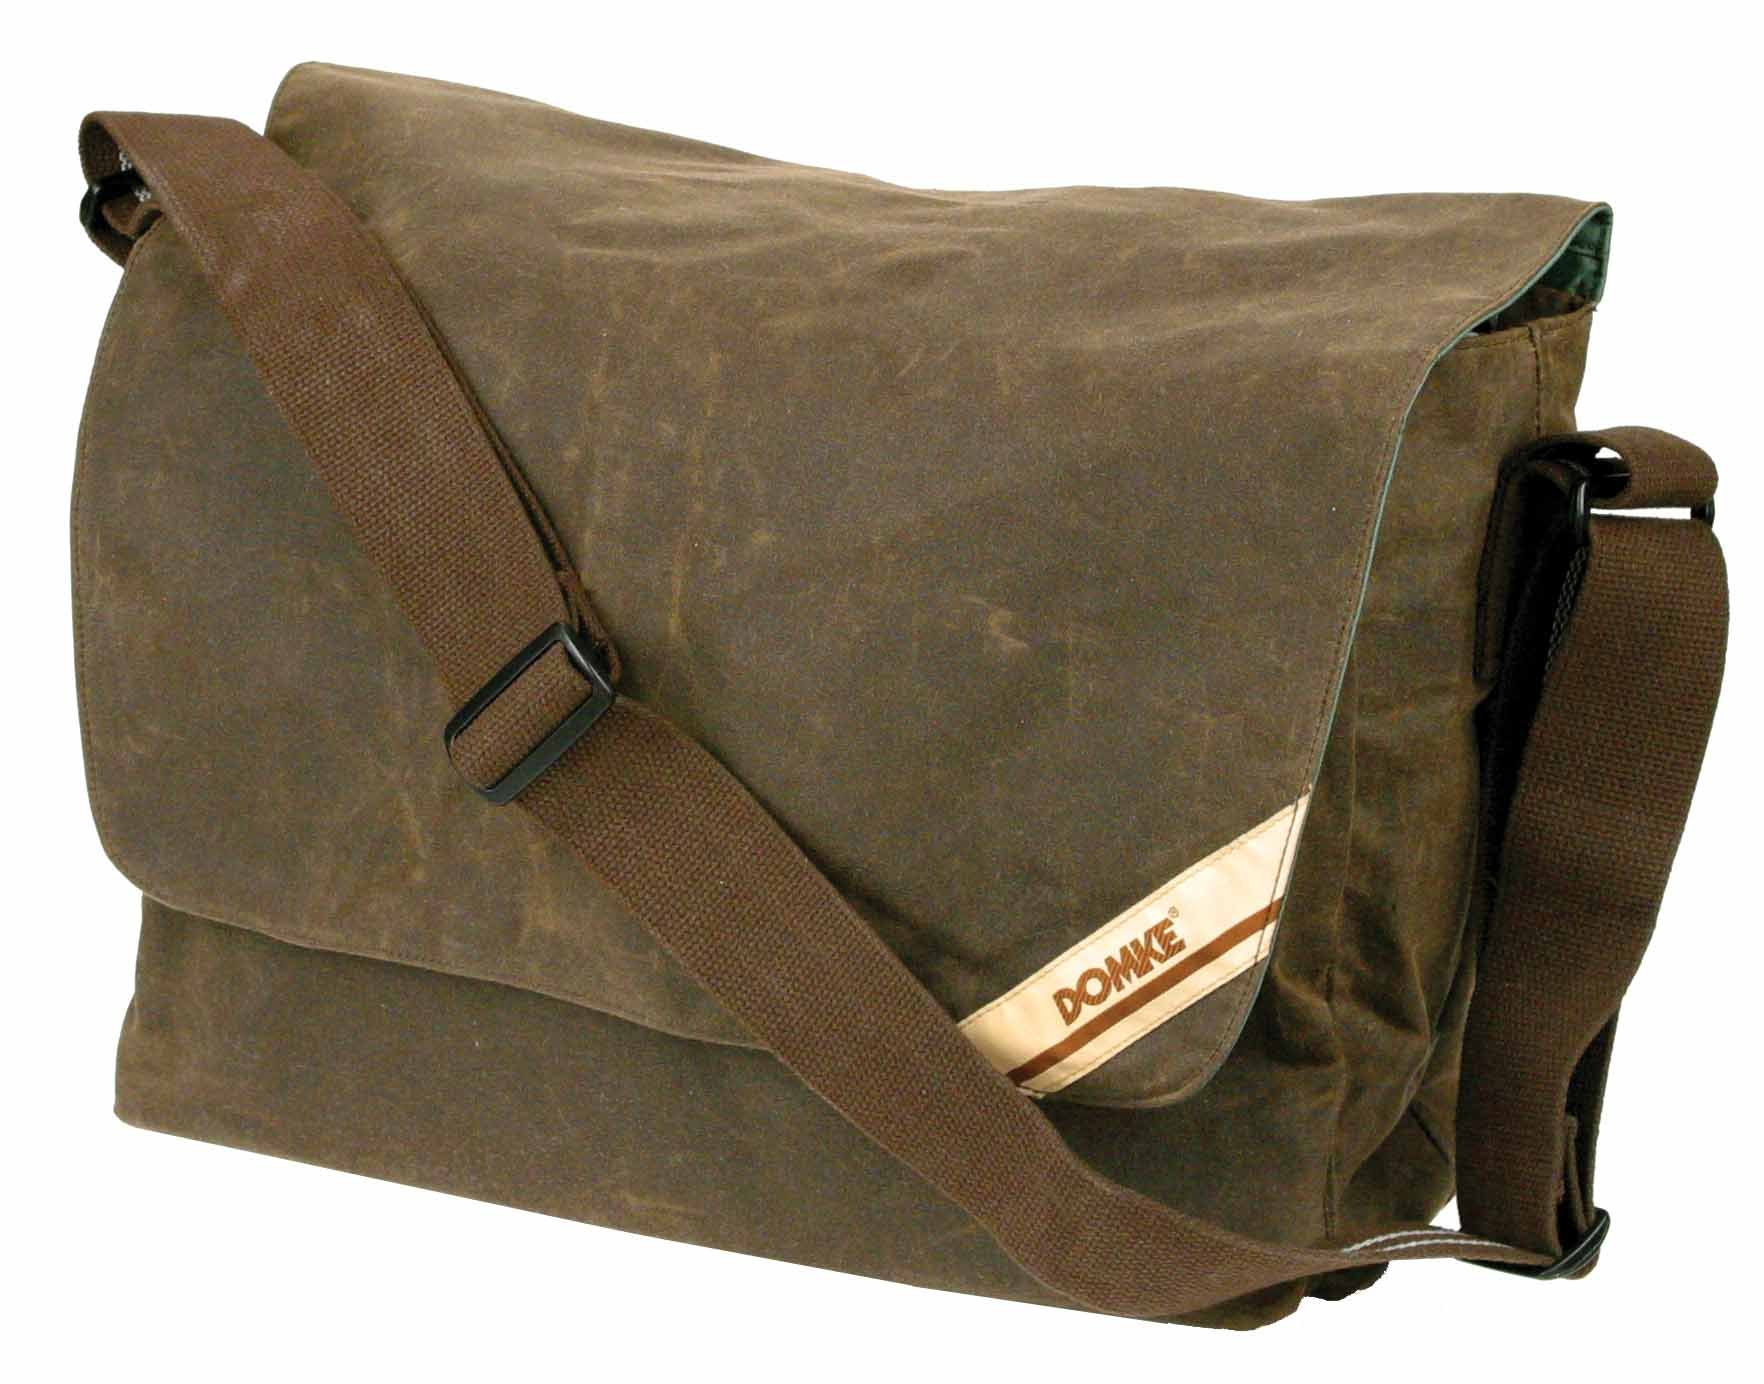 Domke F-833 Large Photo Courier Bag Rugged Wear - Brown